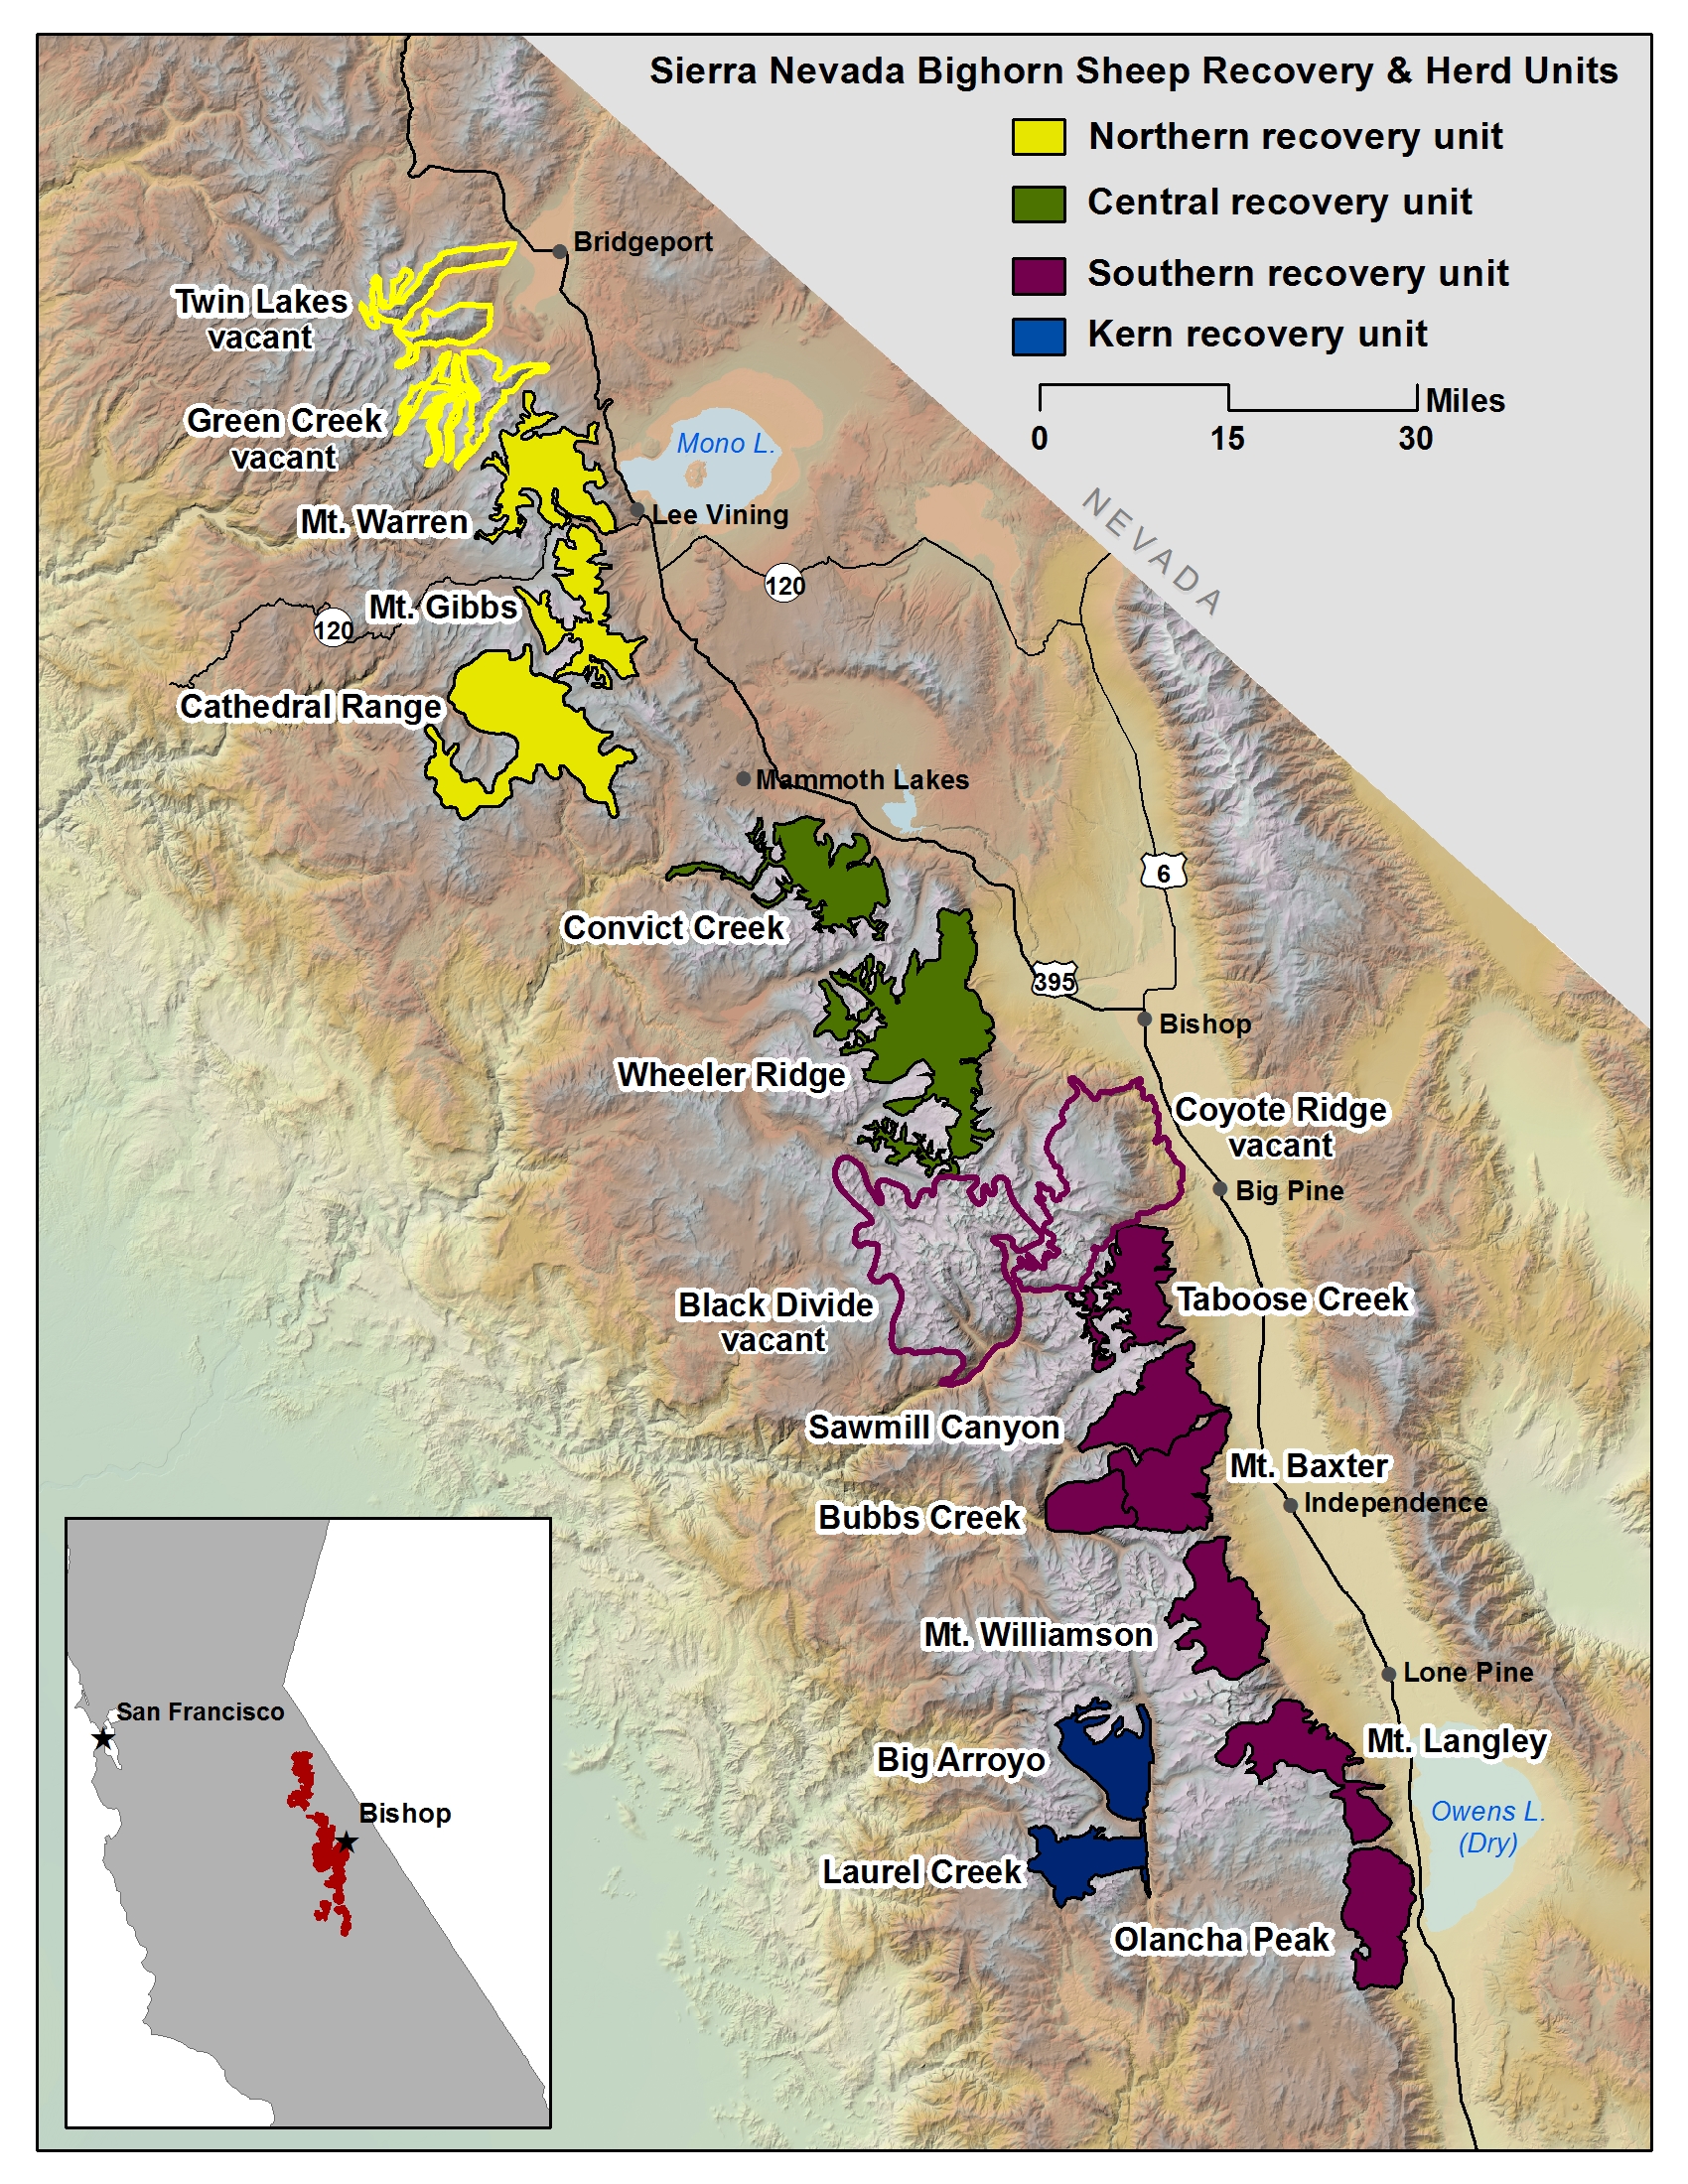 Bighorn Sheep Distribution in Sierra Nevada Mountains click to view in new window